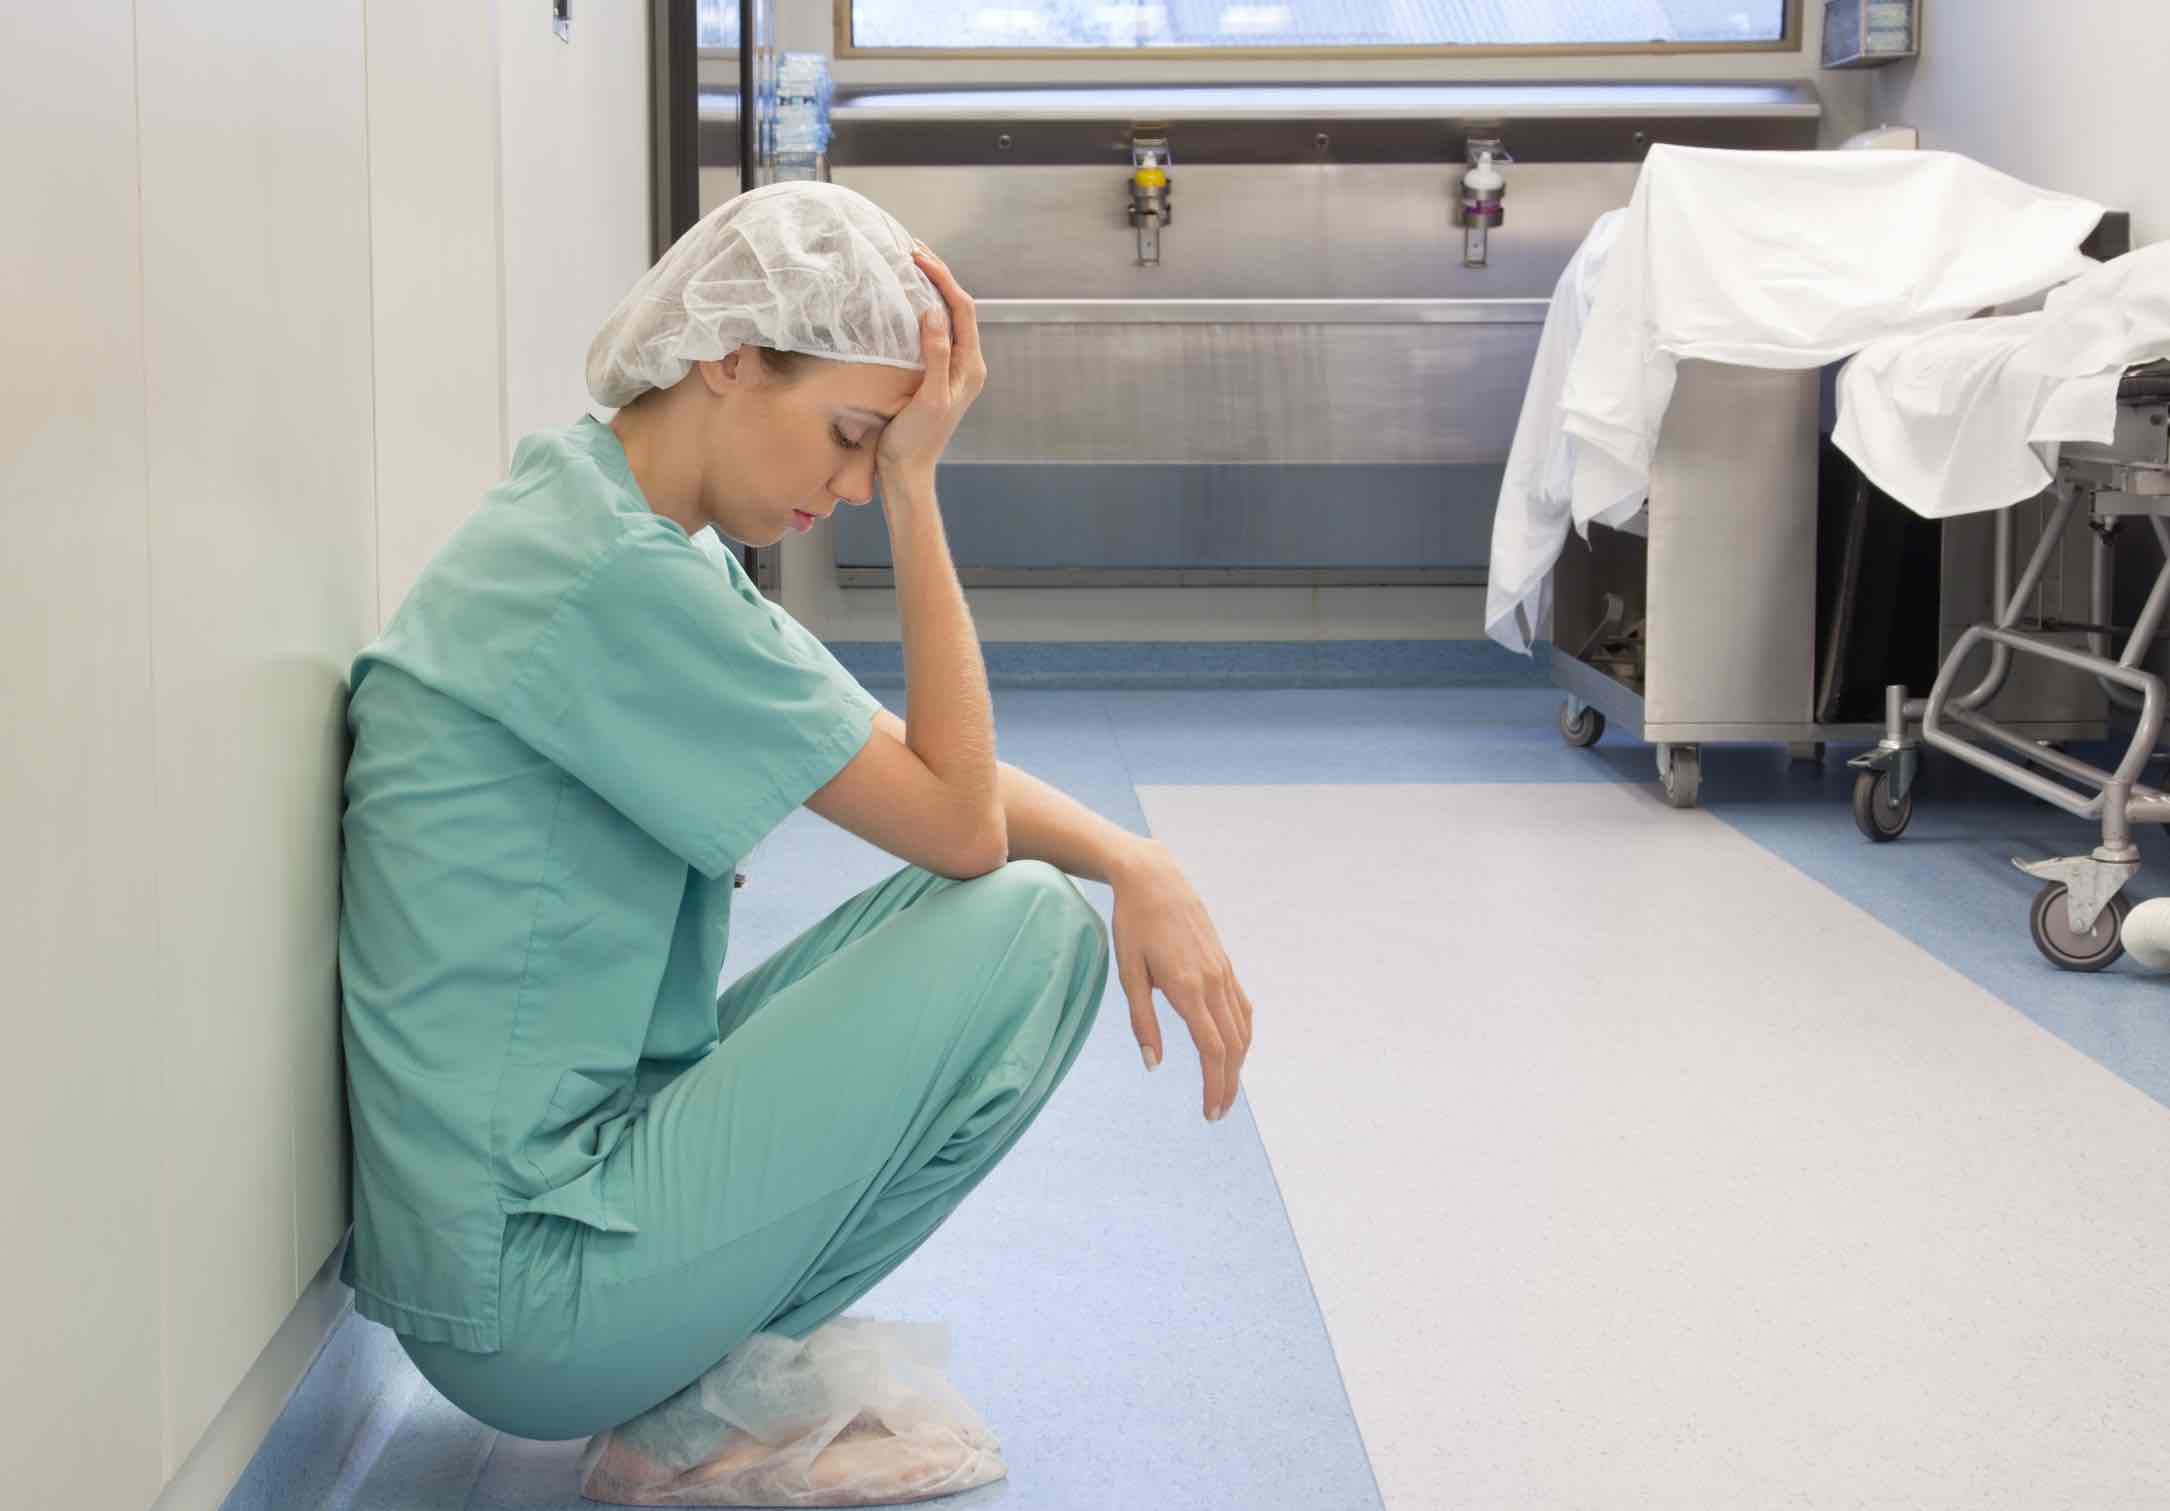 Physician burnout is a worsening problem | Tdnews